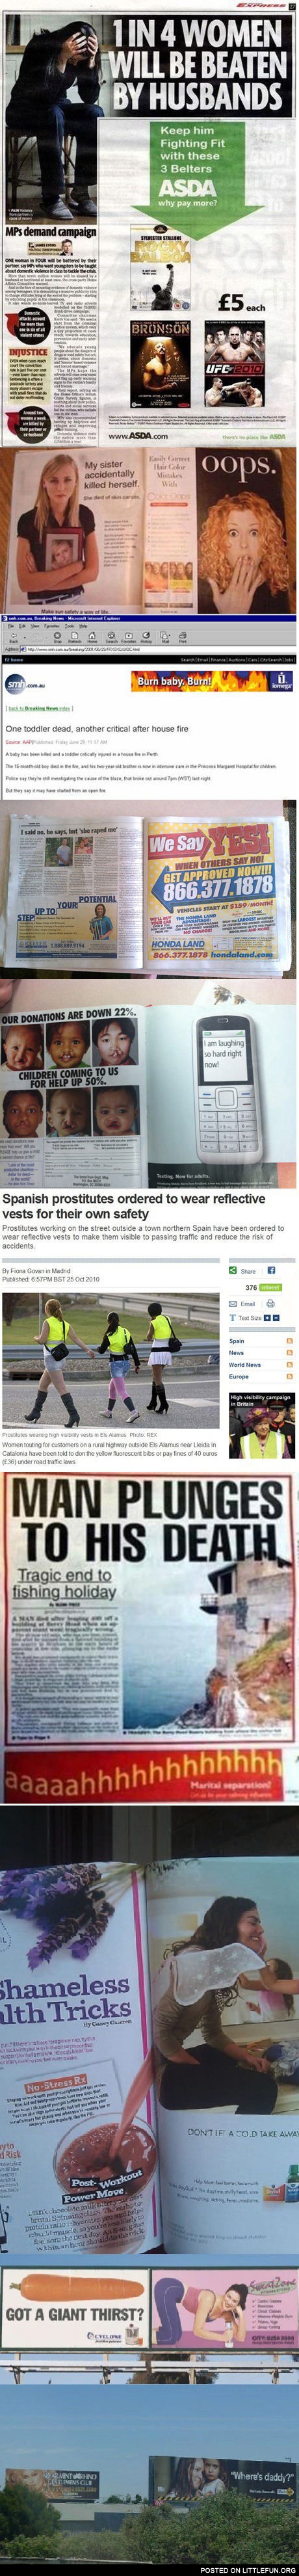 Ad Placement Fails